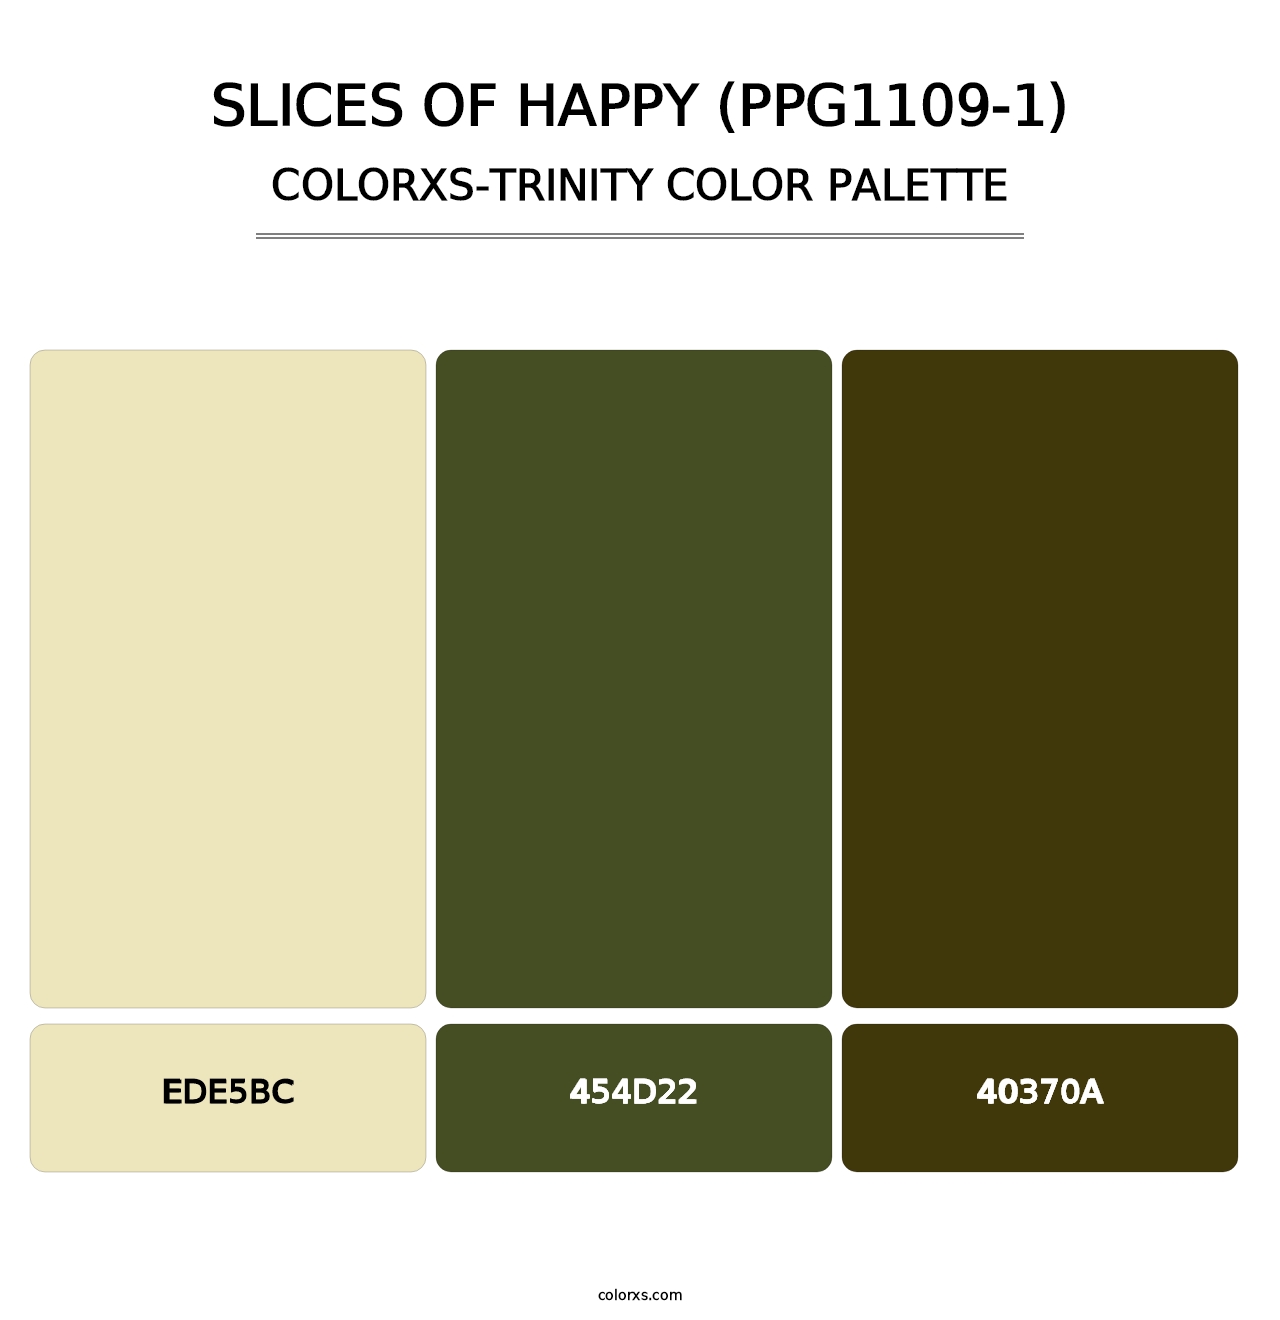 Slices Of Happy (PPG1109-1) - Colorxs Trinity Palette